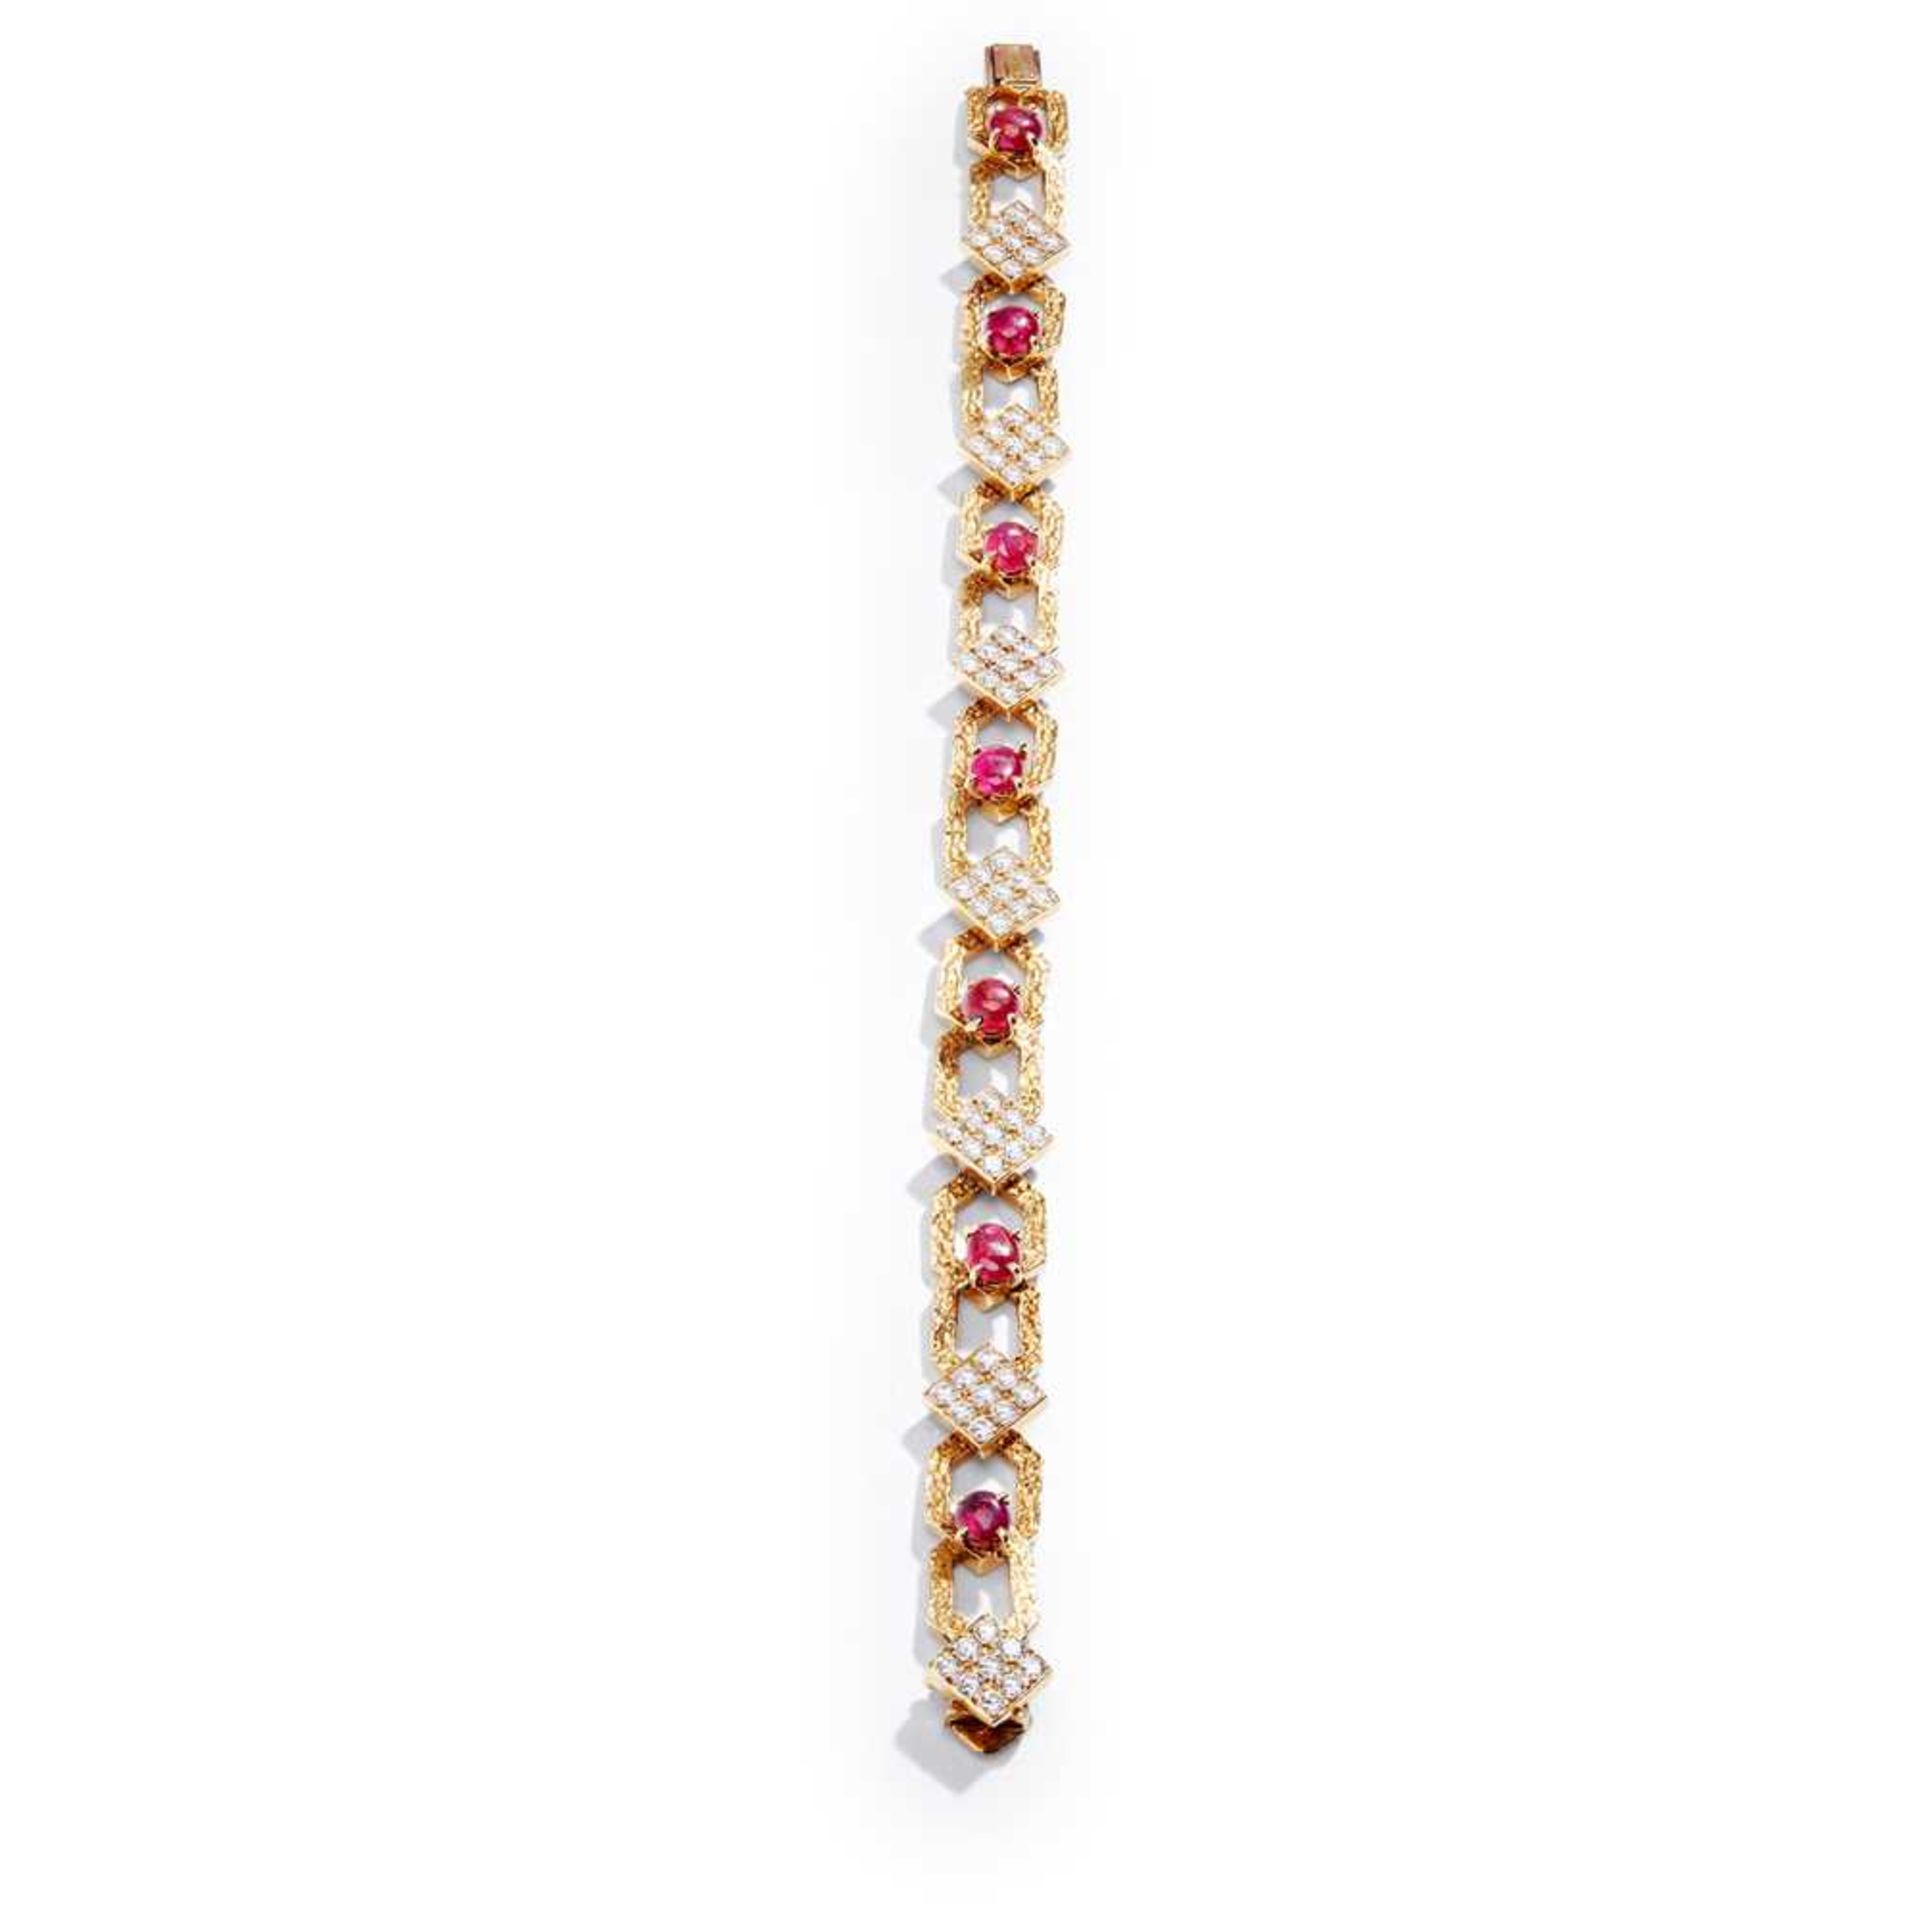 A ruby and diamond-set necklace, bracelet and pair of earrings, by M. Gerard, 1970s - Image 7 of 8